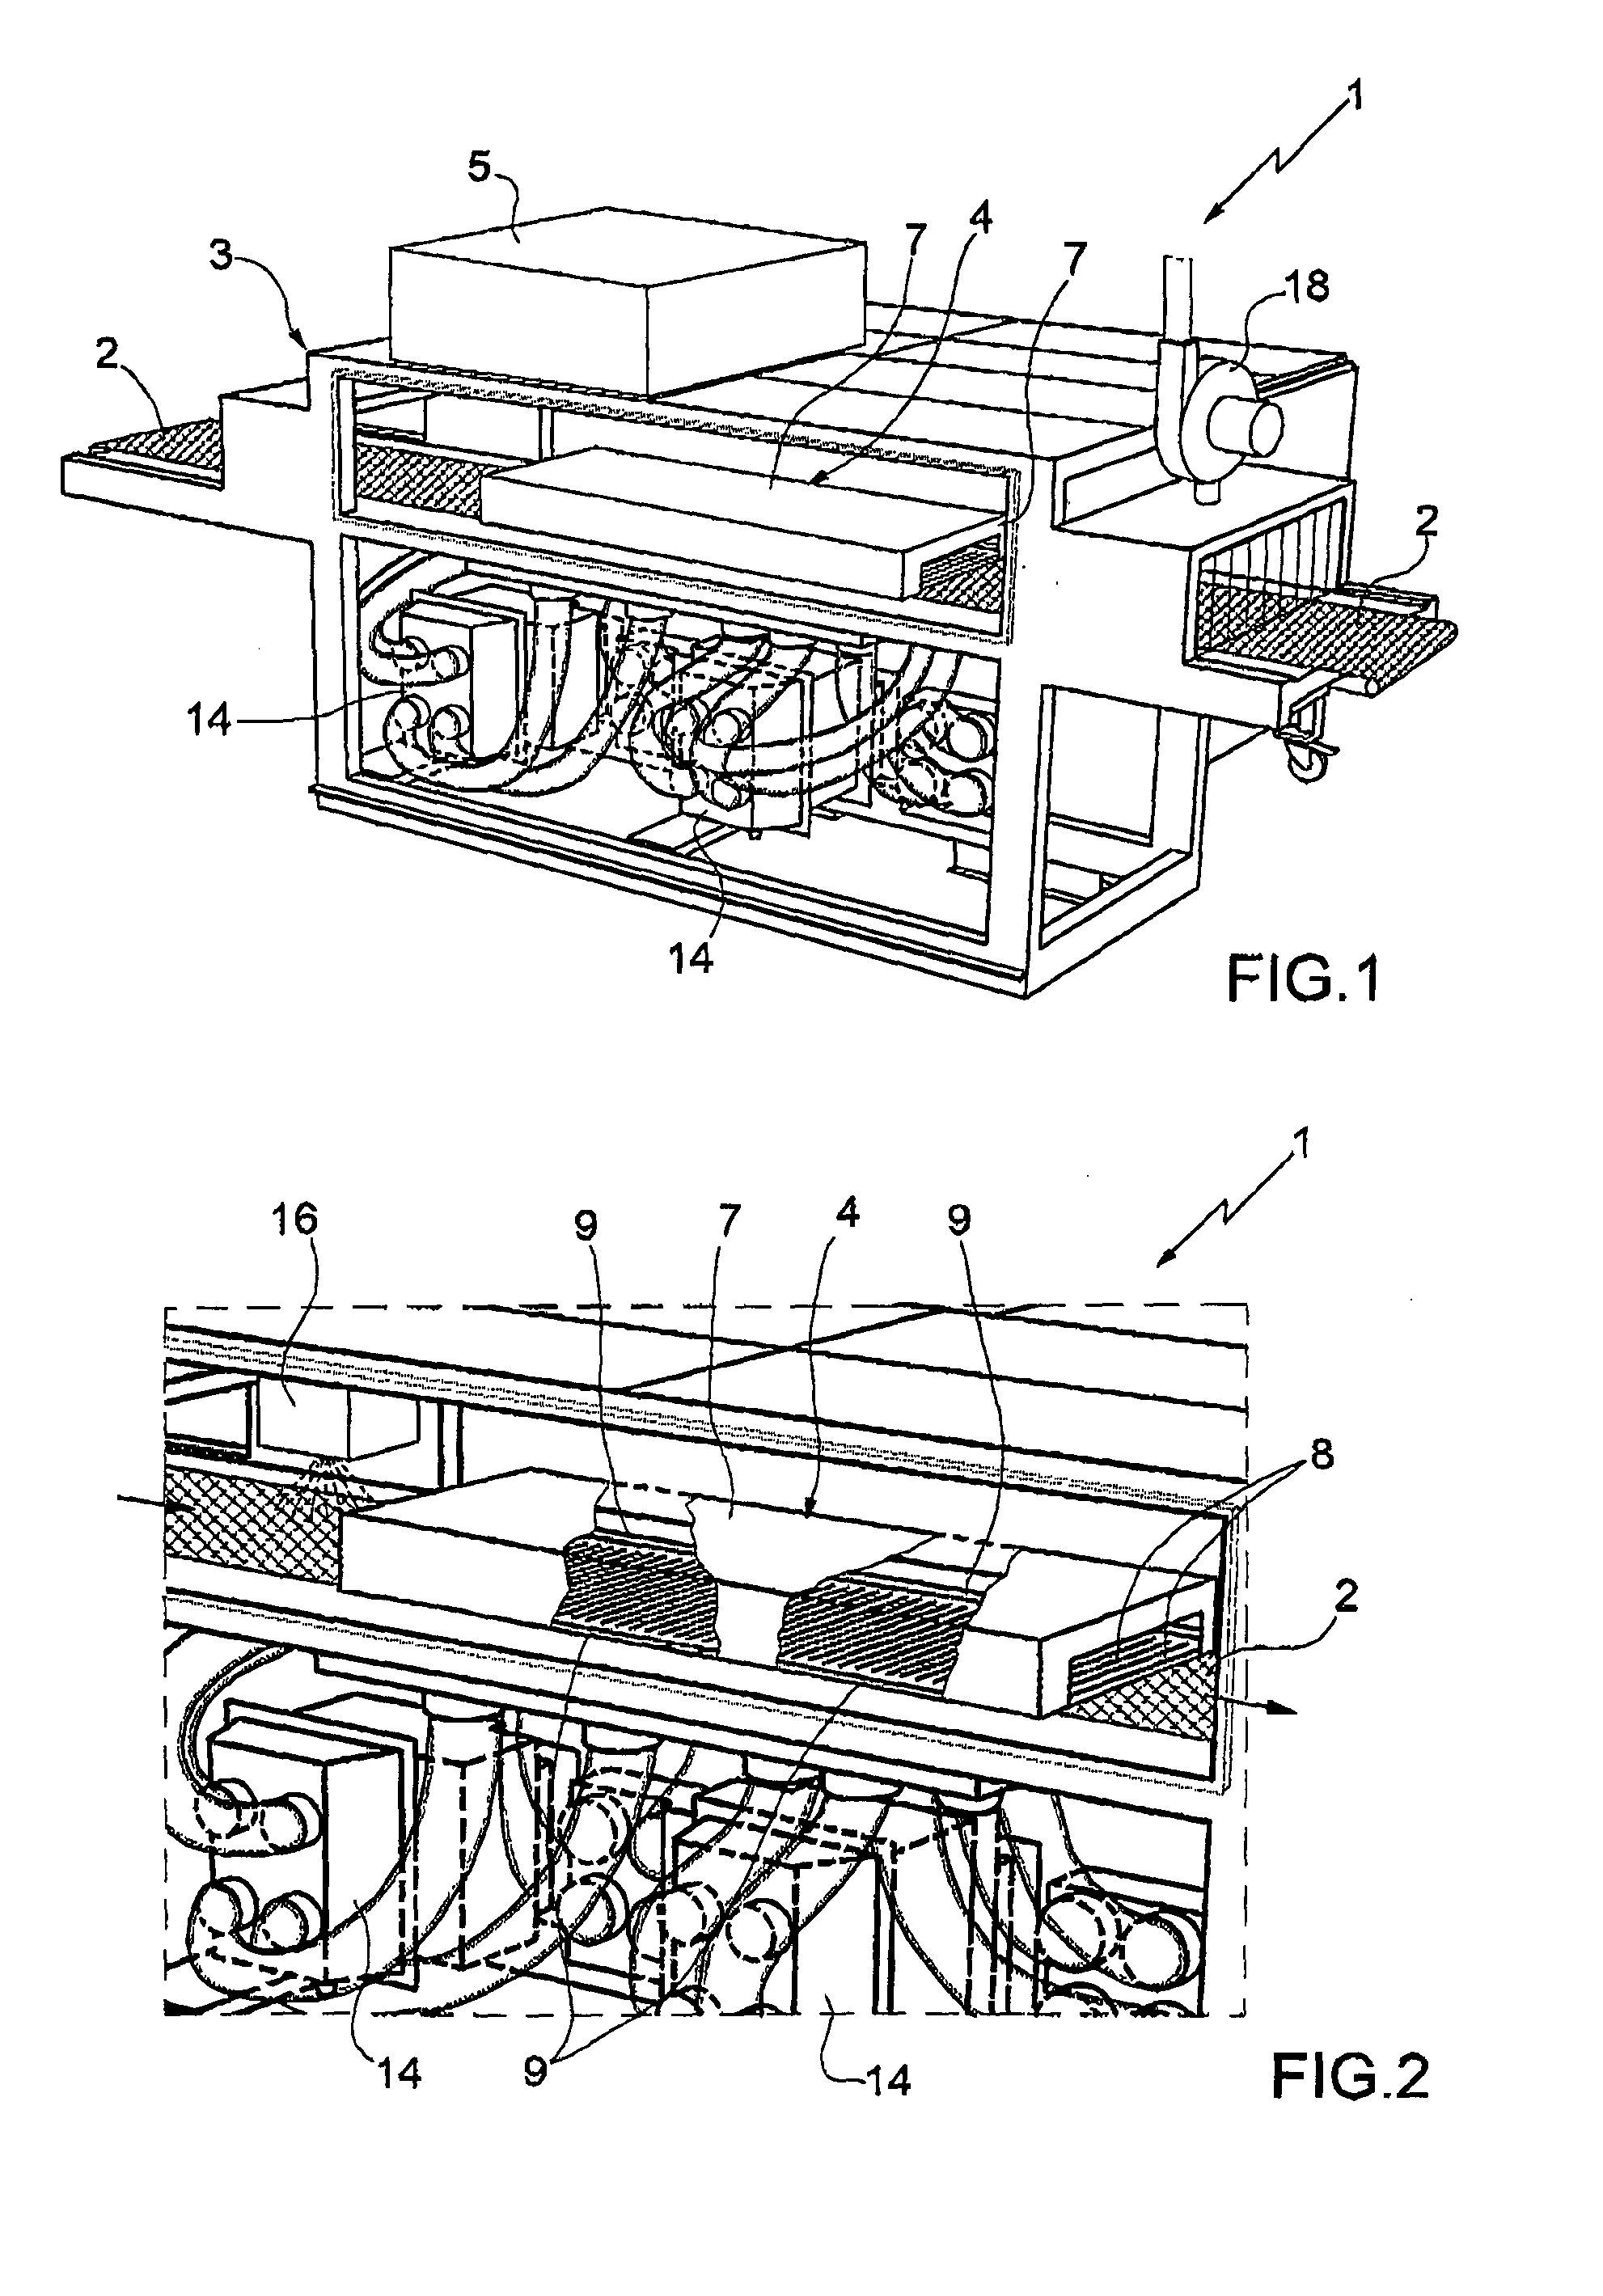 Apparatus and Method for Drying and/or Treating Loose Food Products